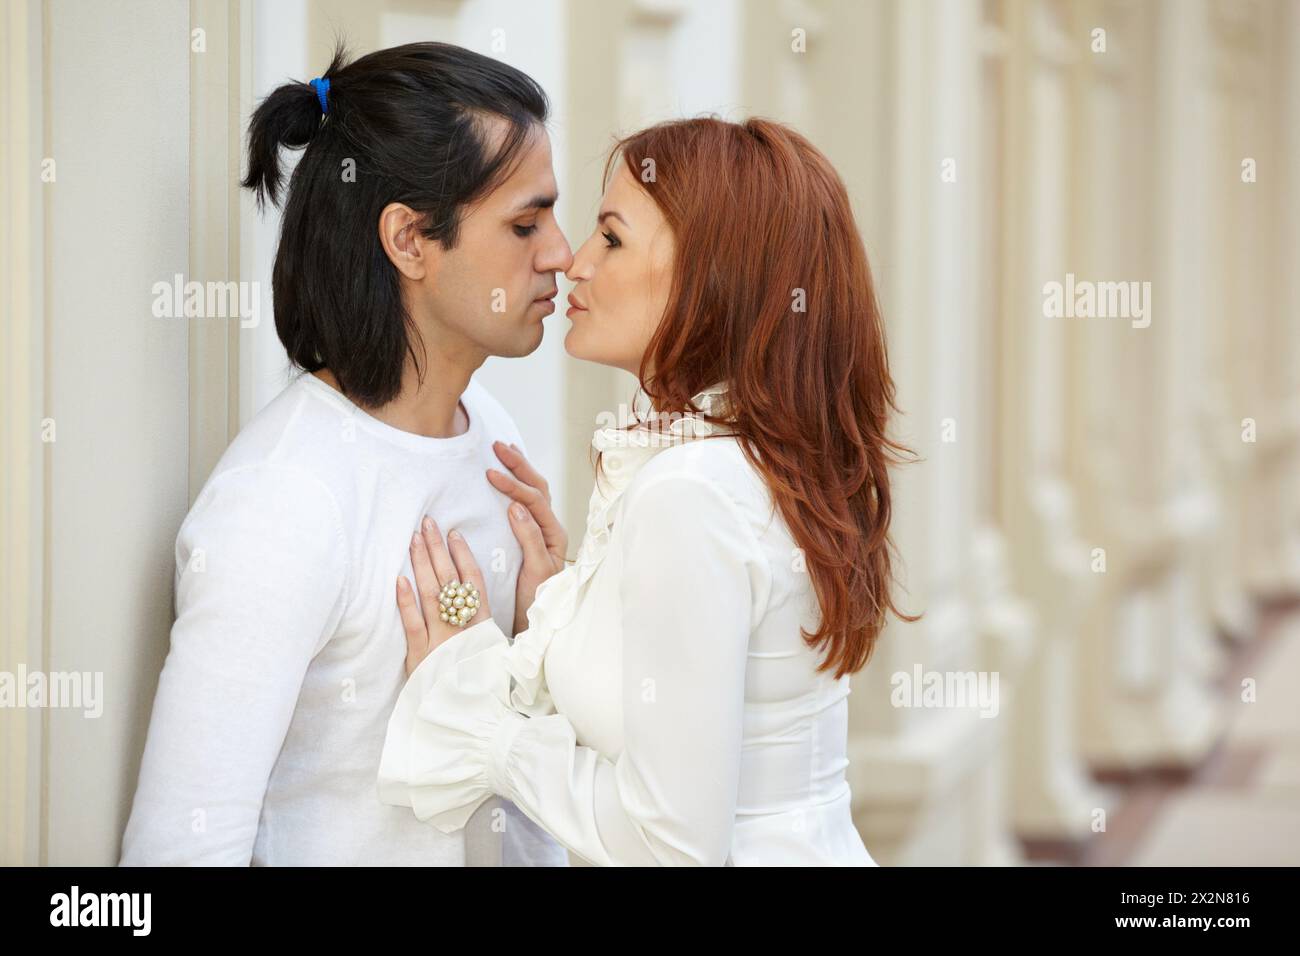 Dark-haired man and red-haired woman stand, touching noses and staring into each others eyes Stock Photo